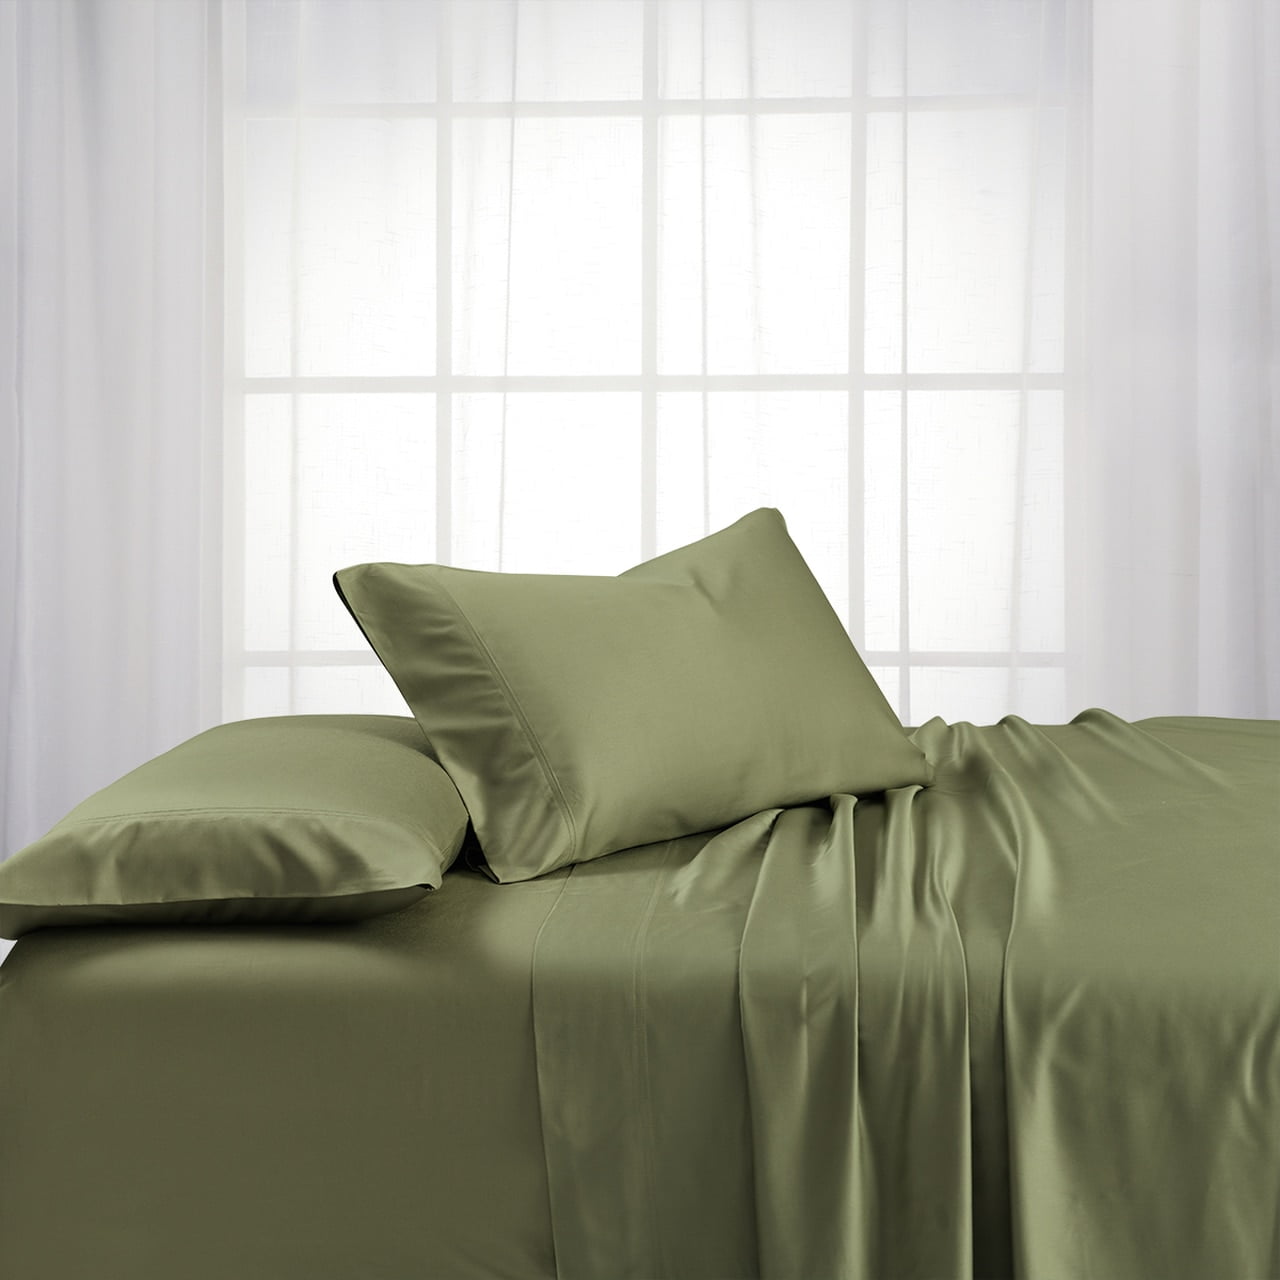 Details about   Fitted sheet 100% cotton 600 TC White solid color Queen & king Size Easy Fits